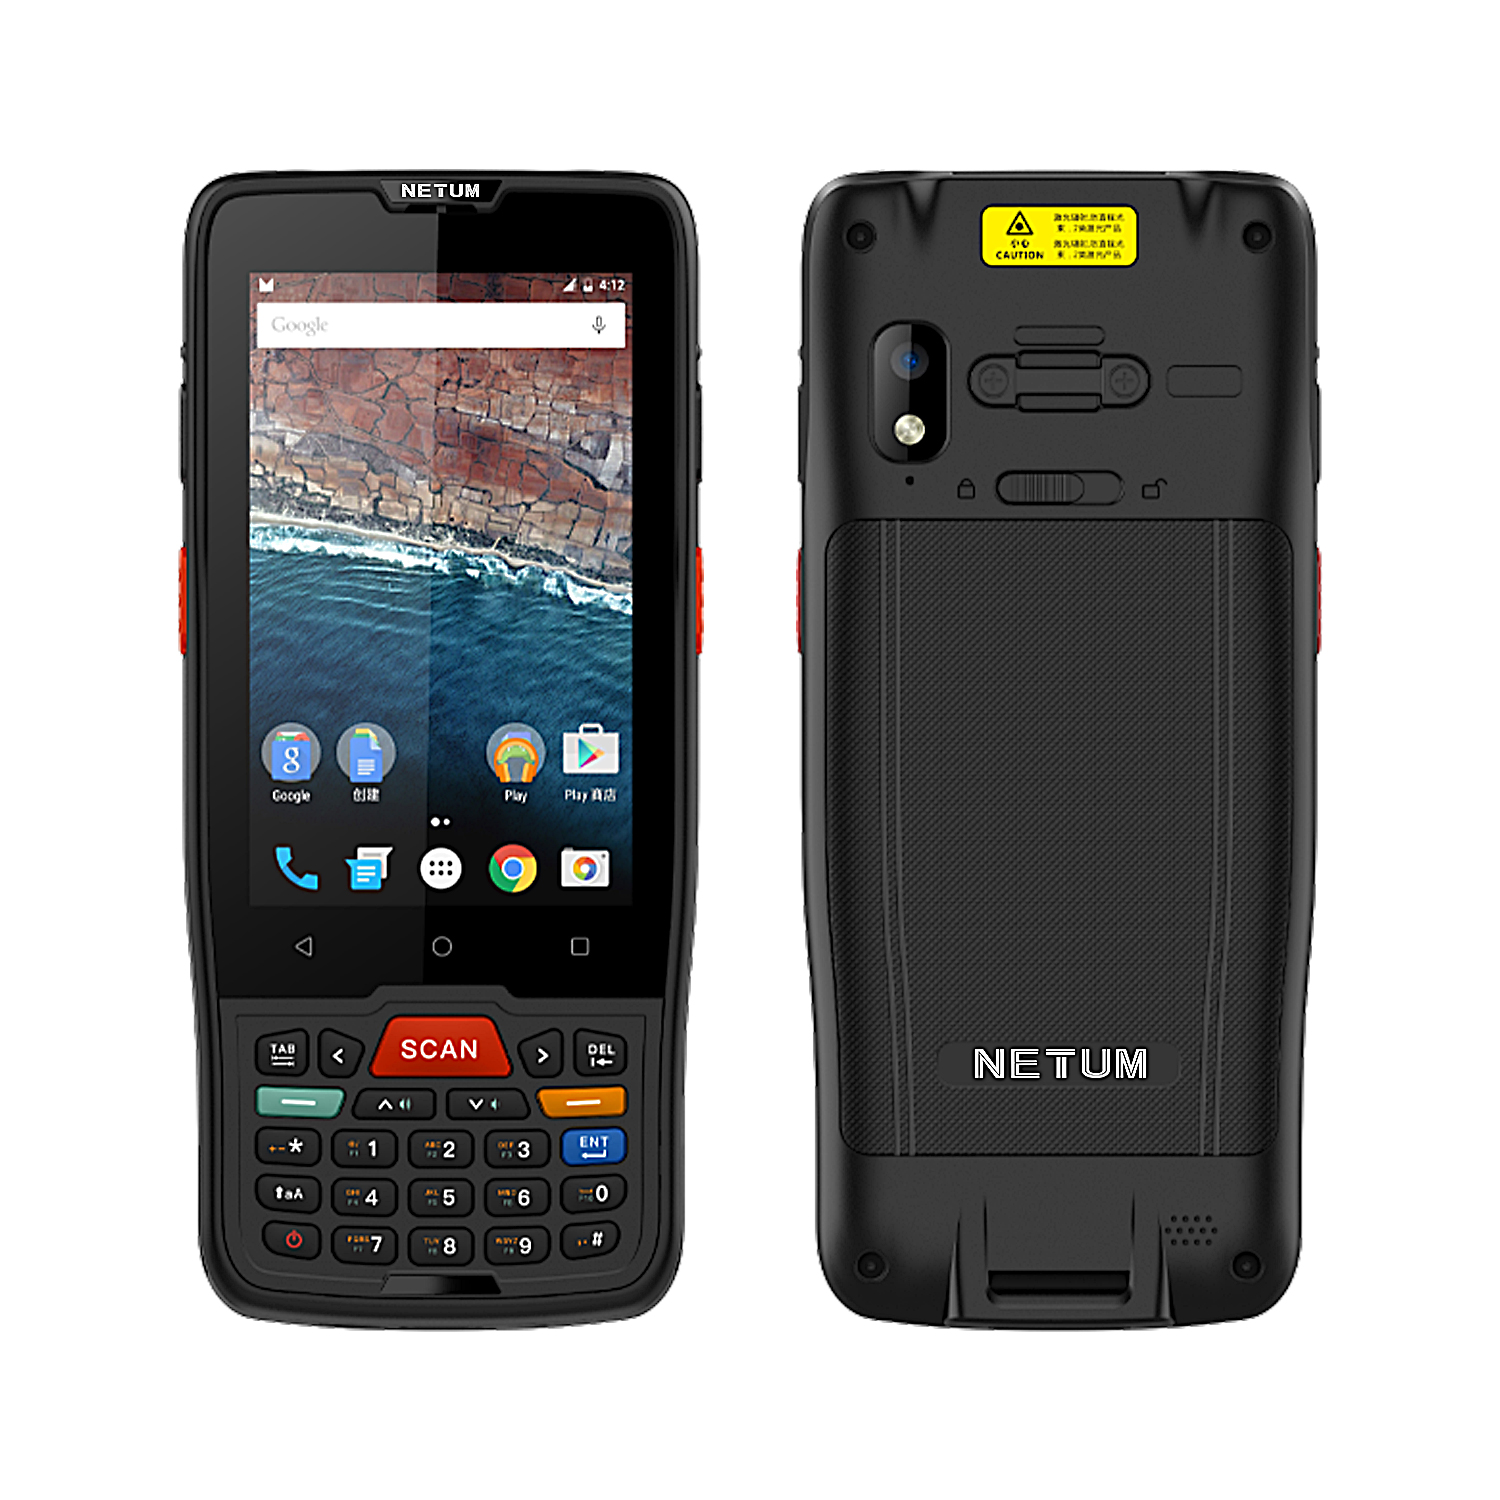 Koop NETUM PDA-D7100, NT-M71 PDA Android Terminal 2D Barcode Scanner Touchscreen Android-terminalapparaat met WIFI 4G GPS. NETUM PDA-D7100, NT-M71 PDA Android Terminal 2D Barcode Scanner Touchscreen Android-terminalapparaat met WIFI 4G GPS Prijzen. NETUM PDA-D7100, NT-M71 PDA Android Terminal 2D Barcode Scanner Touchscreen Android-terminalapparaat met WIFI 4G GPS Brands. NETUM PDA-D7100, NT-M71 PDA Android Terminal 2D Barcode Scanner Touchscreen Android-terminalapparaat met WIFI 4G GPS Fabrikant. NETUM PDA-D7100, NT-M71 PDA Android Terminal 2D Barcode Scanner Touchscreen Android-terminalapparaat met WIFI 4G GPS Quotes. NETUM PDA-D7100, NT-M71 PDA Android Terminal 2D Barcode Scanner Touchscreen Android-terminalapparaat met WIFI 4G GPS Company.